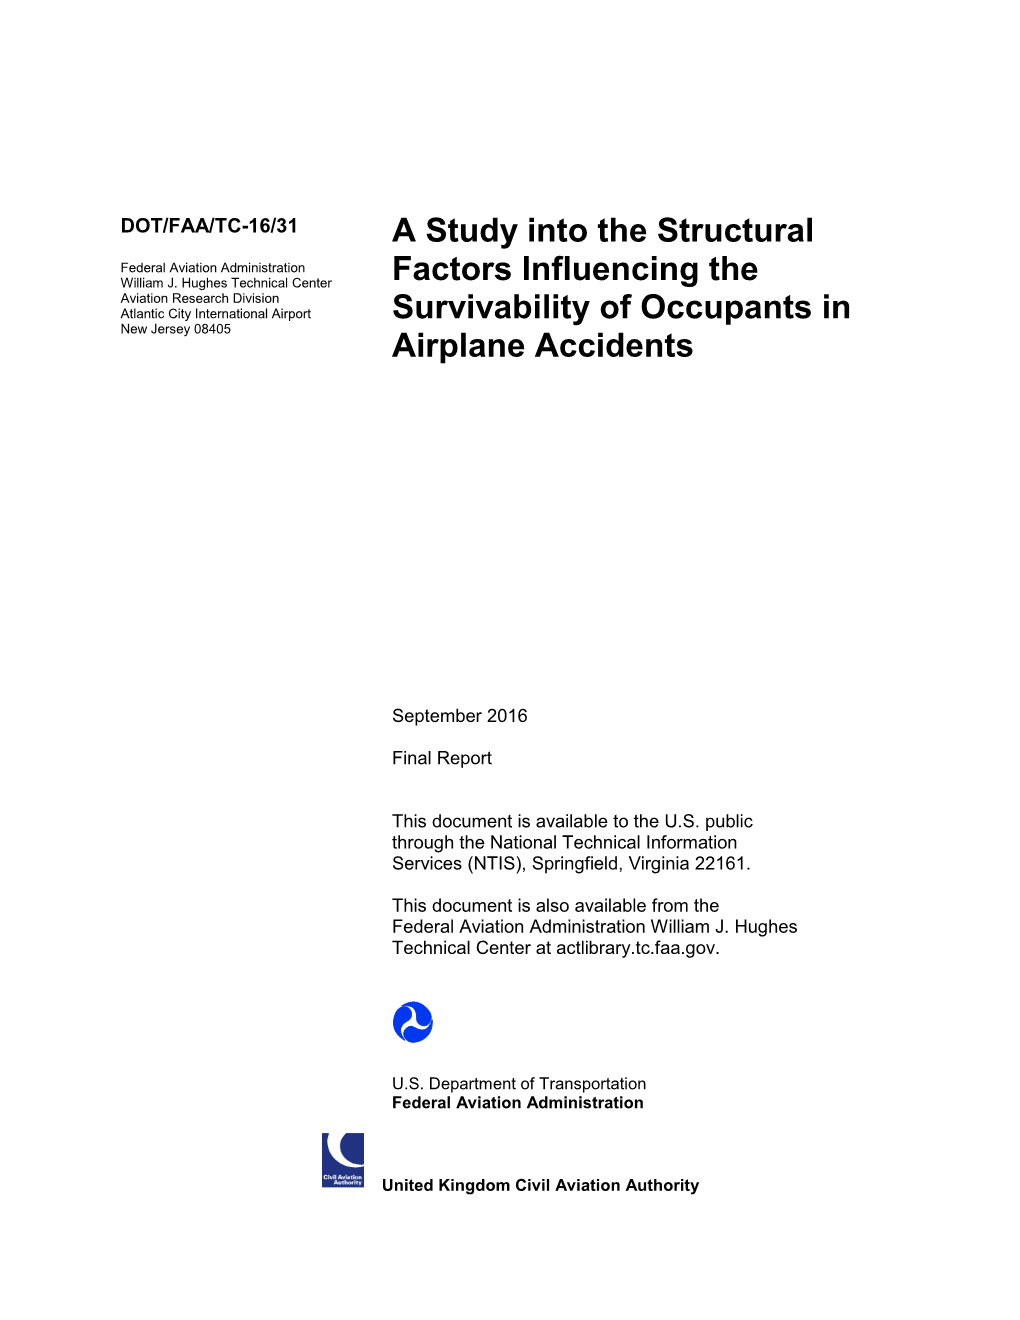 A Study Into the Structural Factors Influencing the Survivability Of